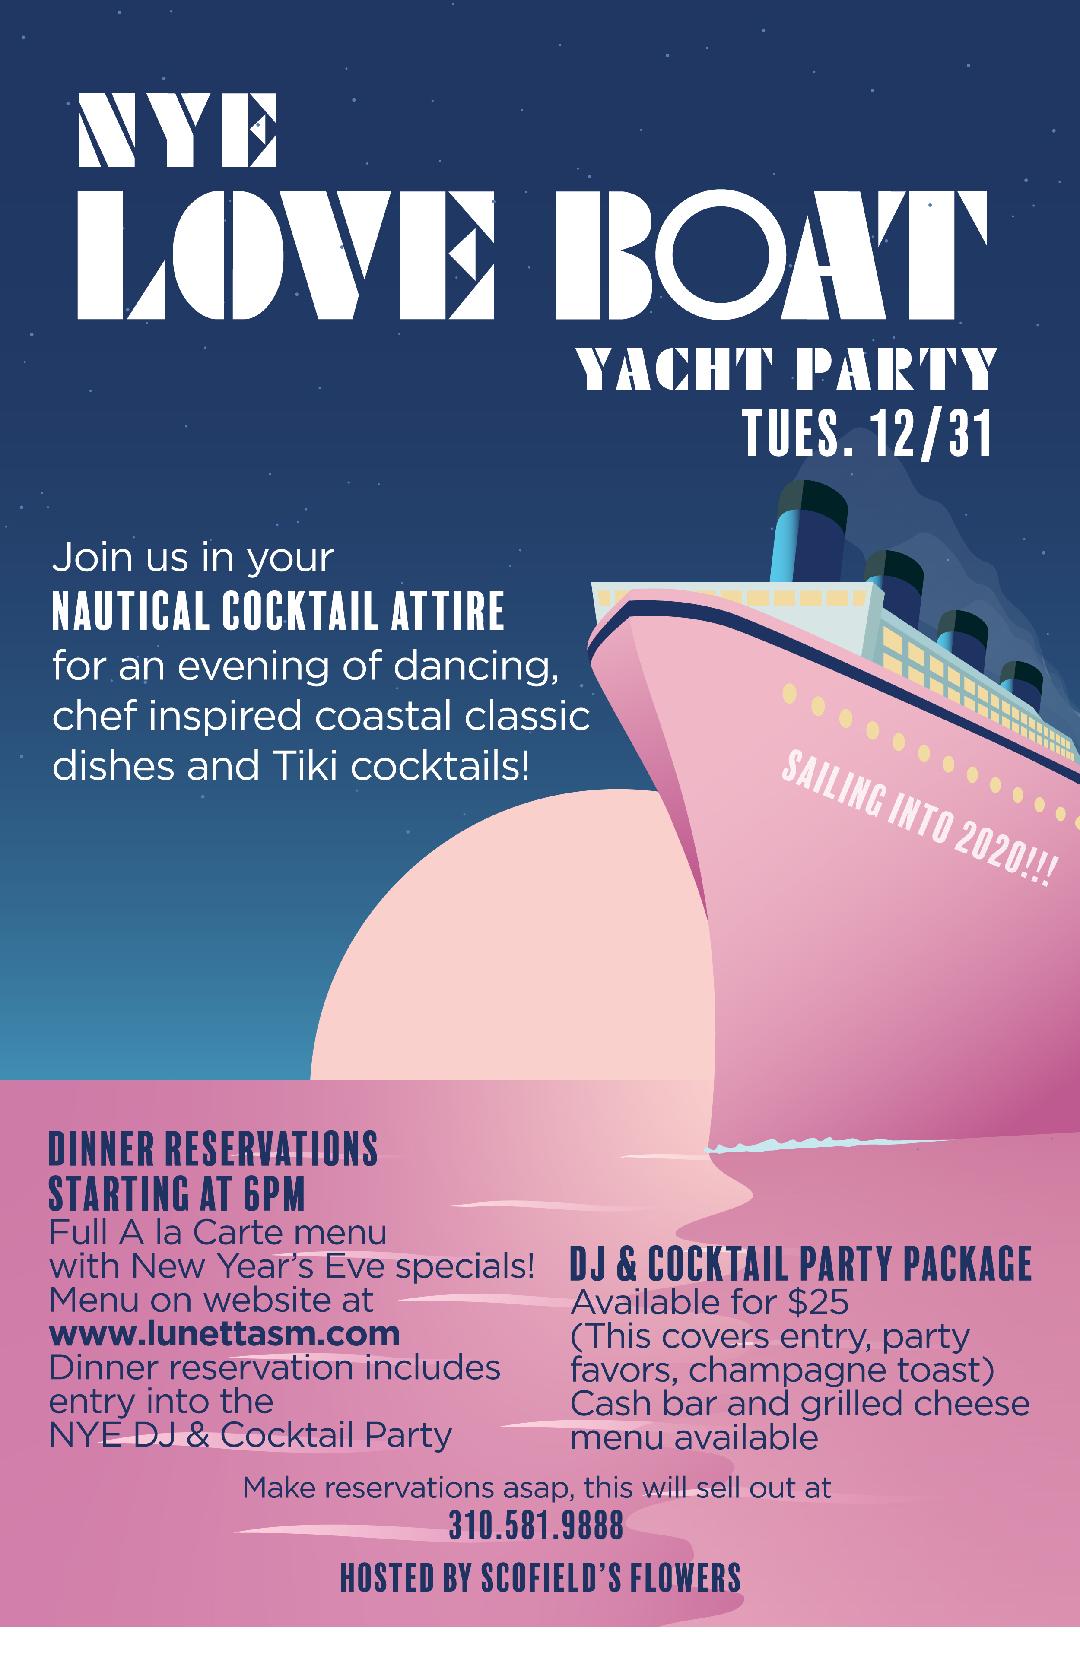 New Year's Eve Love Boat Yacht Party at Lunetta